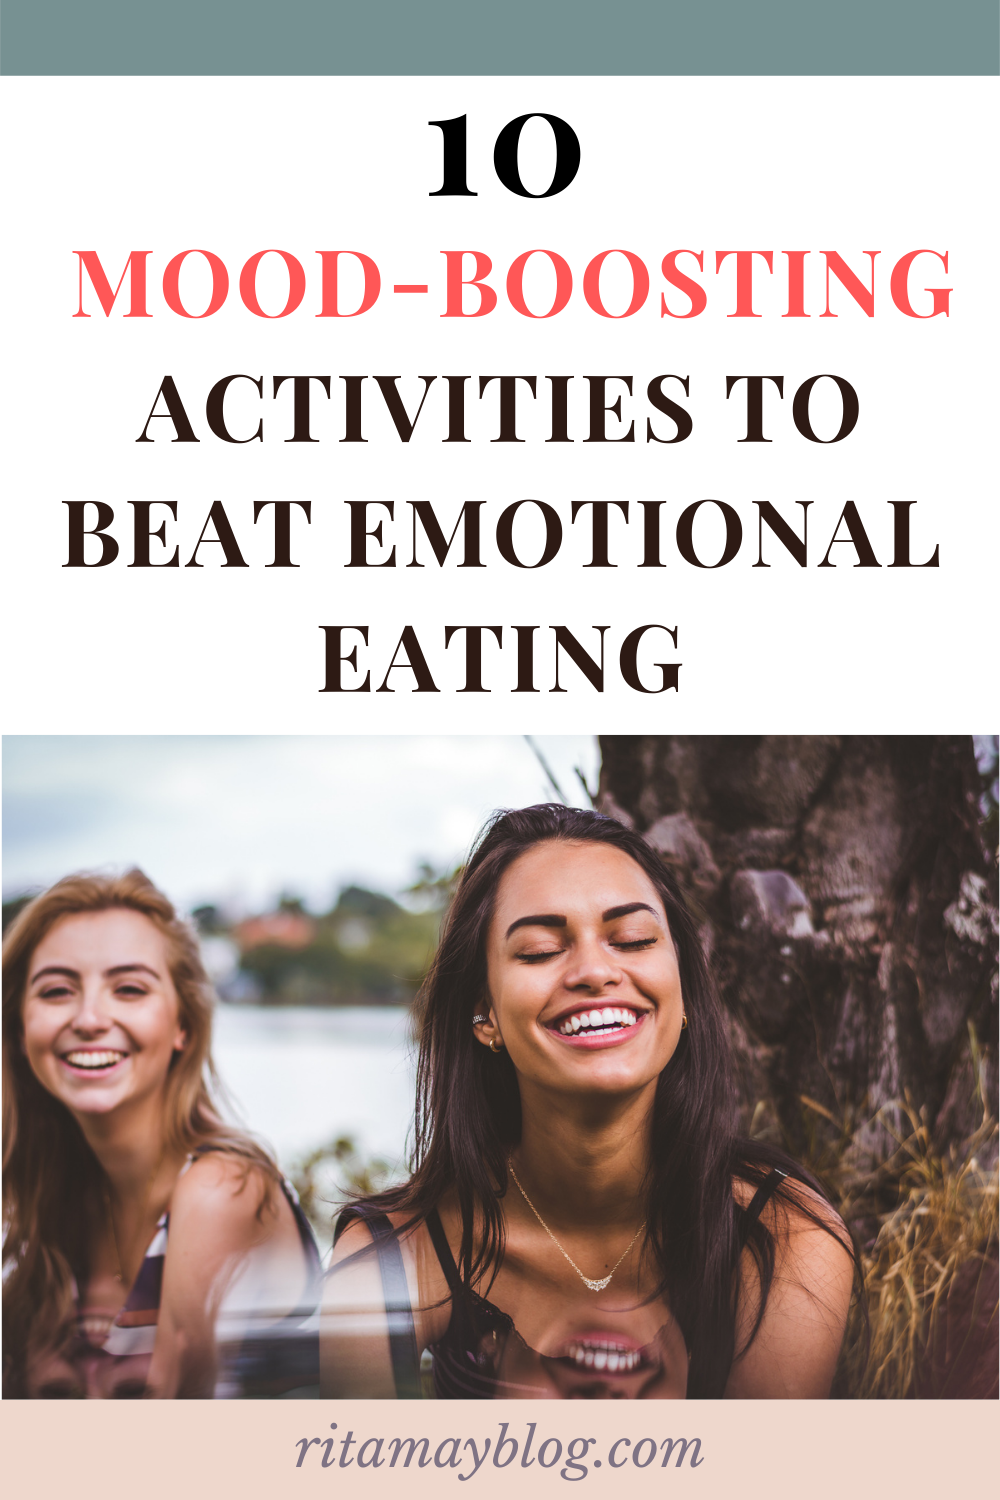 10 mood-boosting activities to eliminate emotional eating